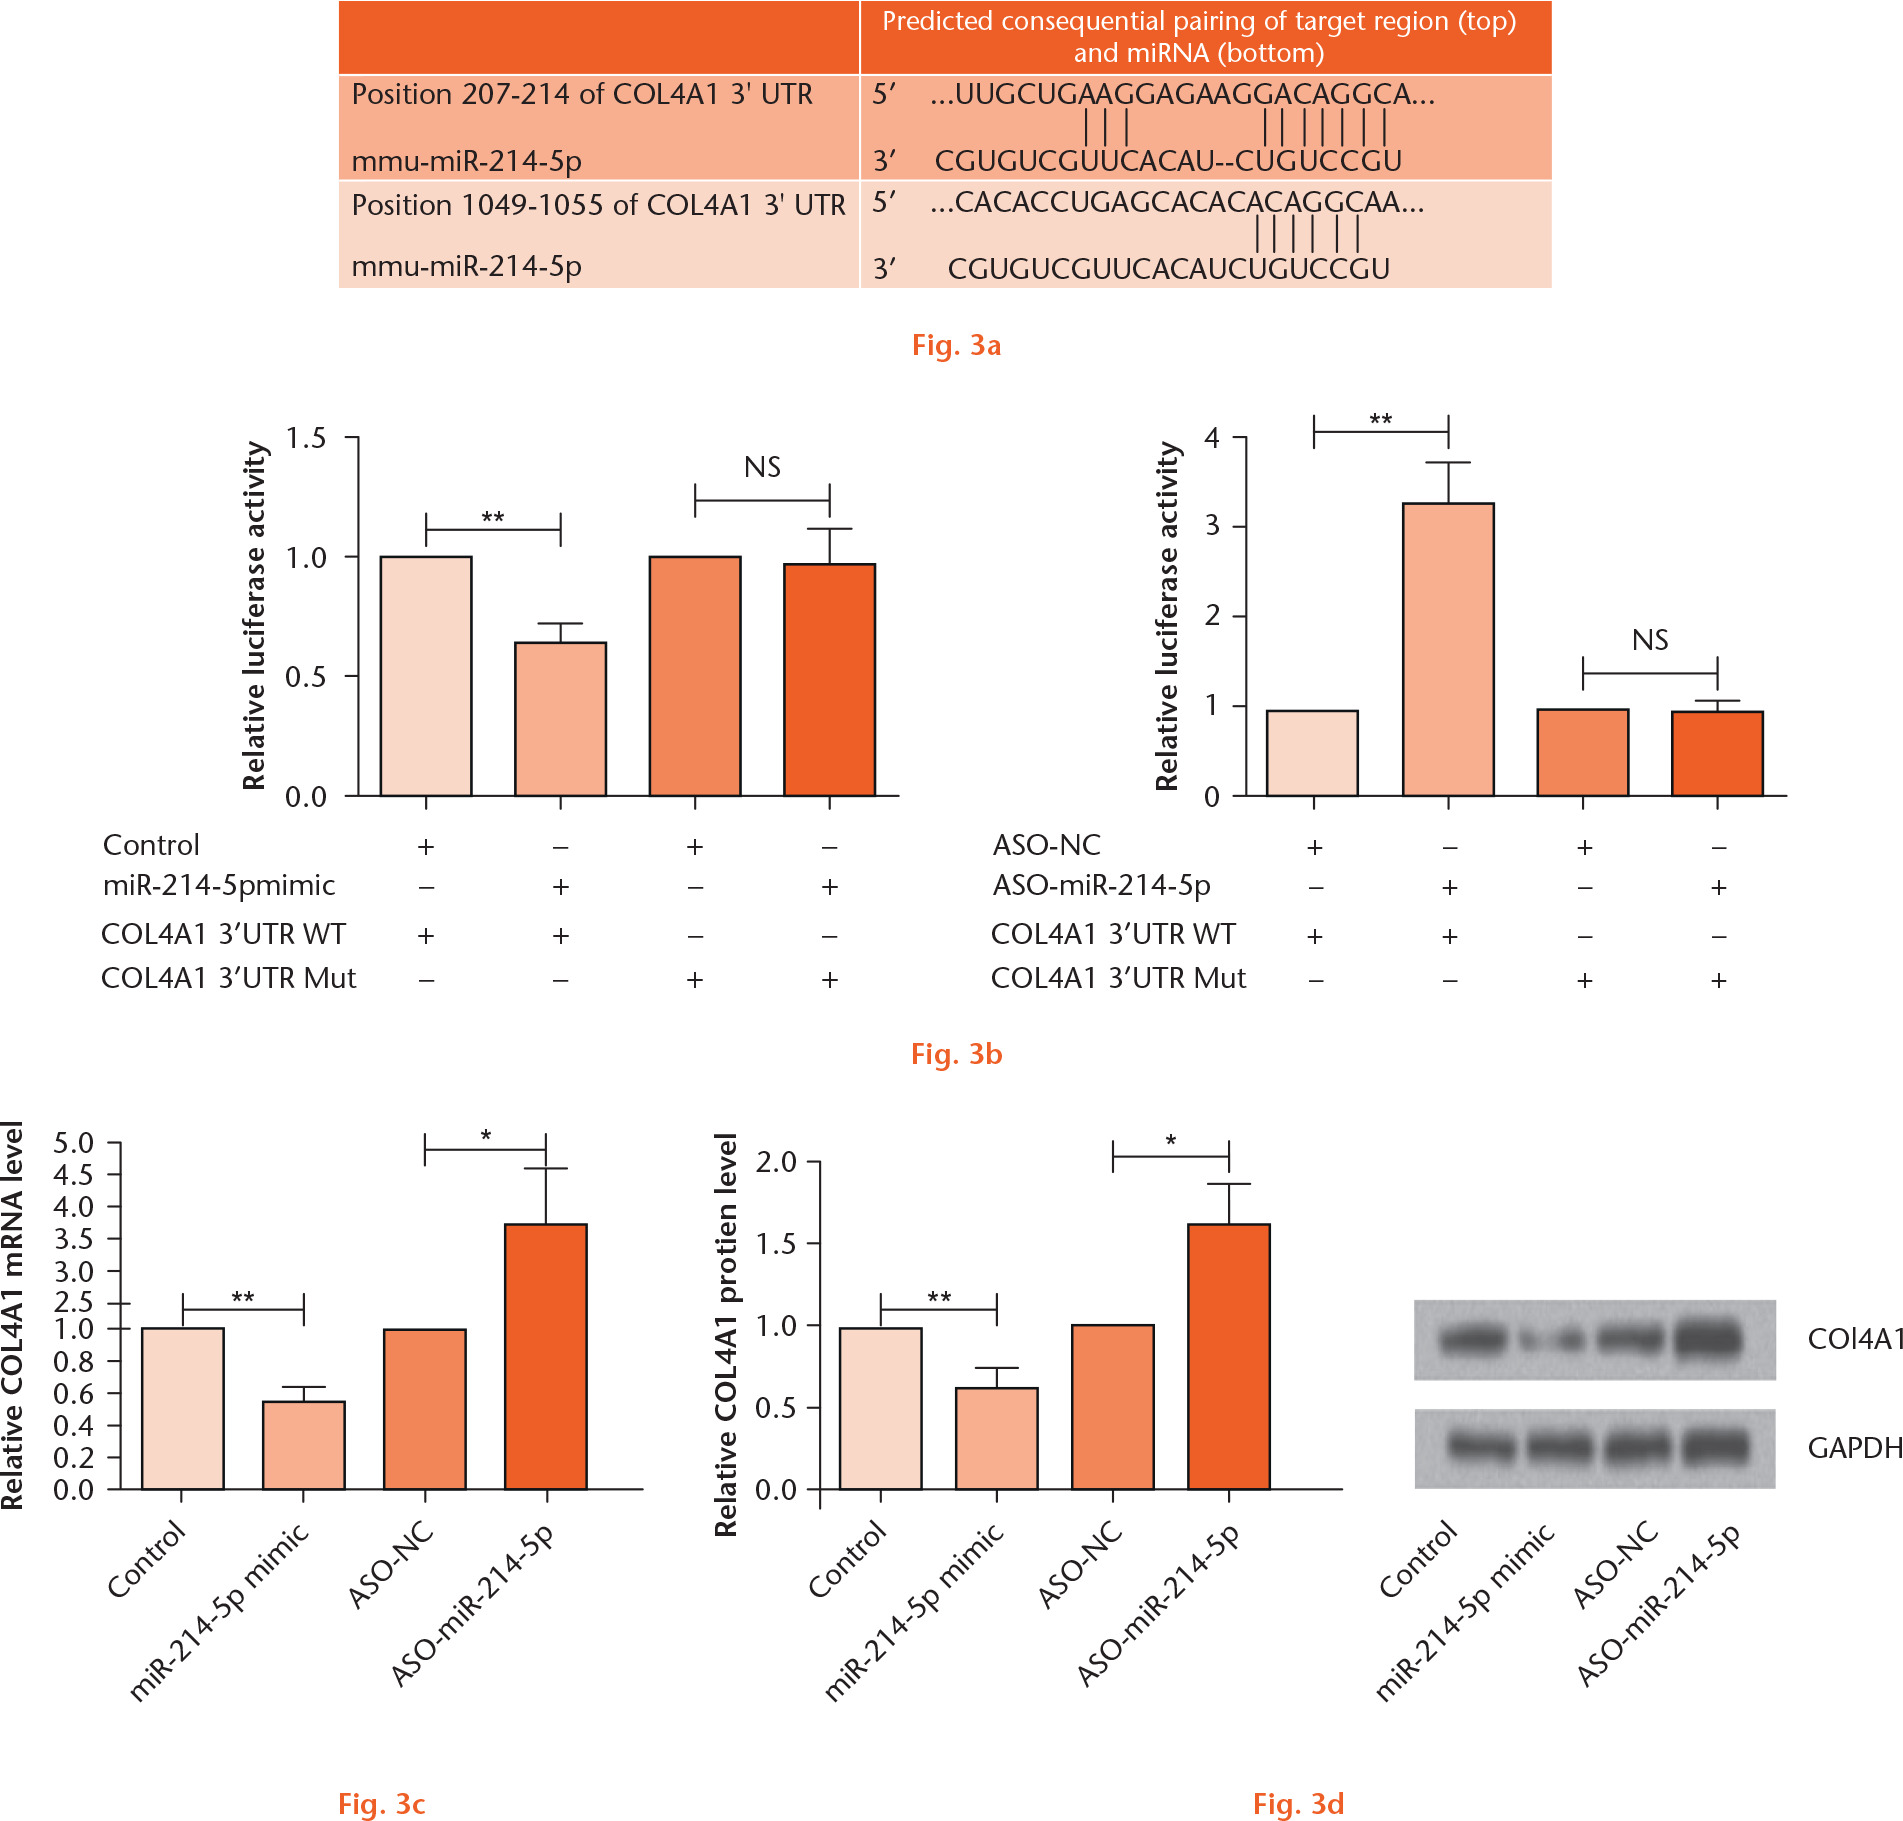  
            COL4A1 is a direct target of miR-214-5p. a) Software prediction of miR-214-5p as potential binding sites on COL4A1 3’UTR; b) relative luciferase activity; c) qRT-PCR for the relative expression of COL4A1 after transfection with miR-214-5p mimic or ASO-miR-214-5p; d) Western blot for the relative expression of COL4A1 after transfection with miR-214-5p mimic or ASO-miR-214-5p. *p < 0.05, **p < 0.01 compared with the control group, NS, not significant.
          